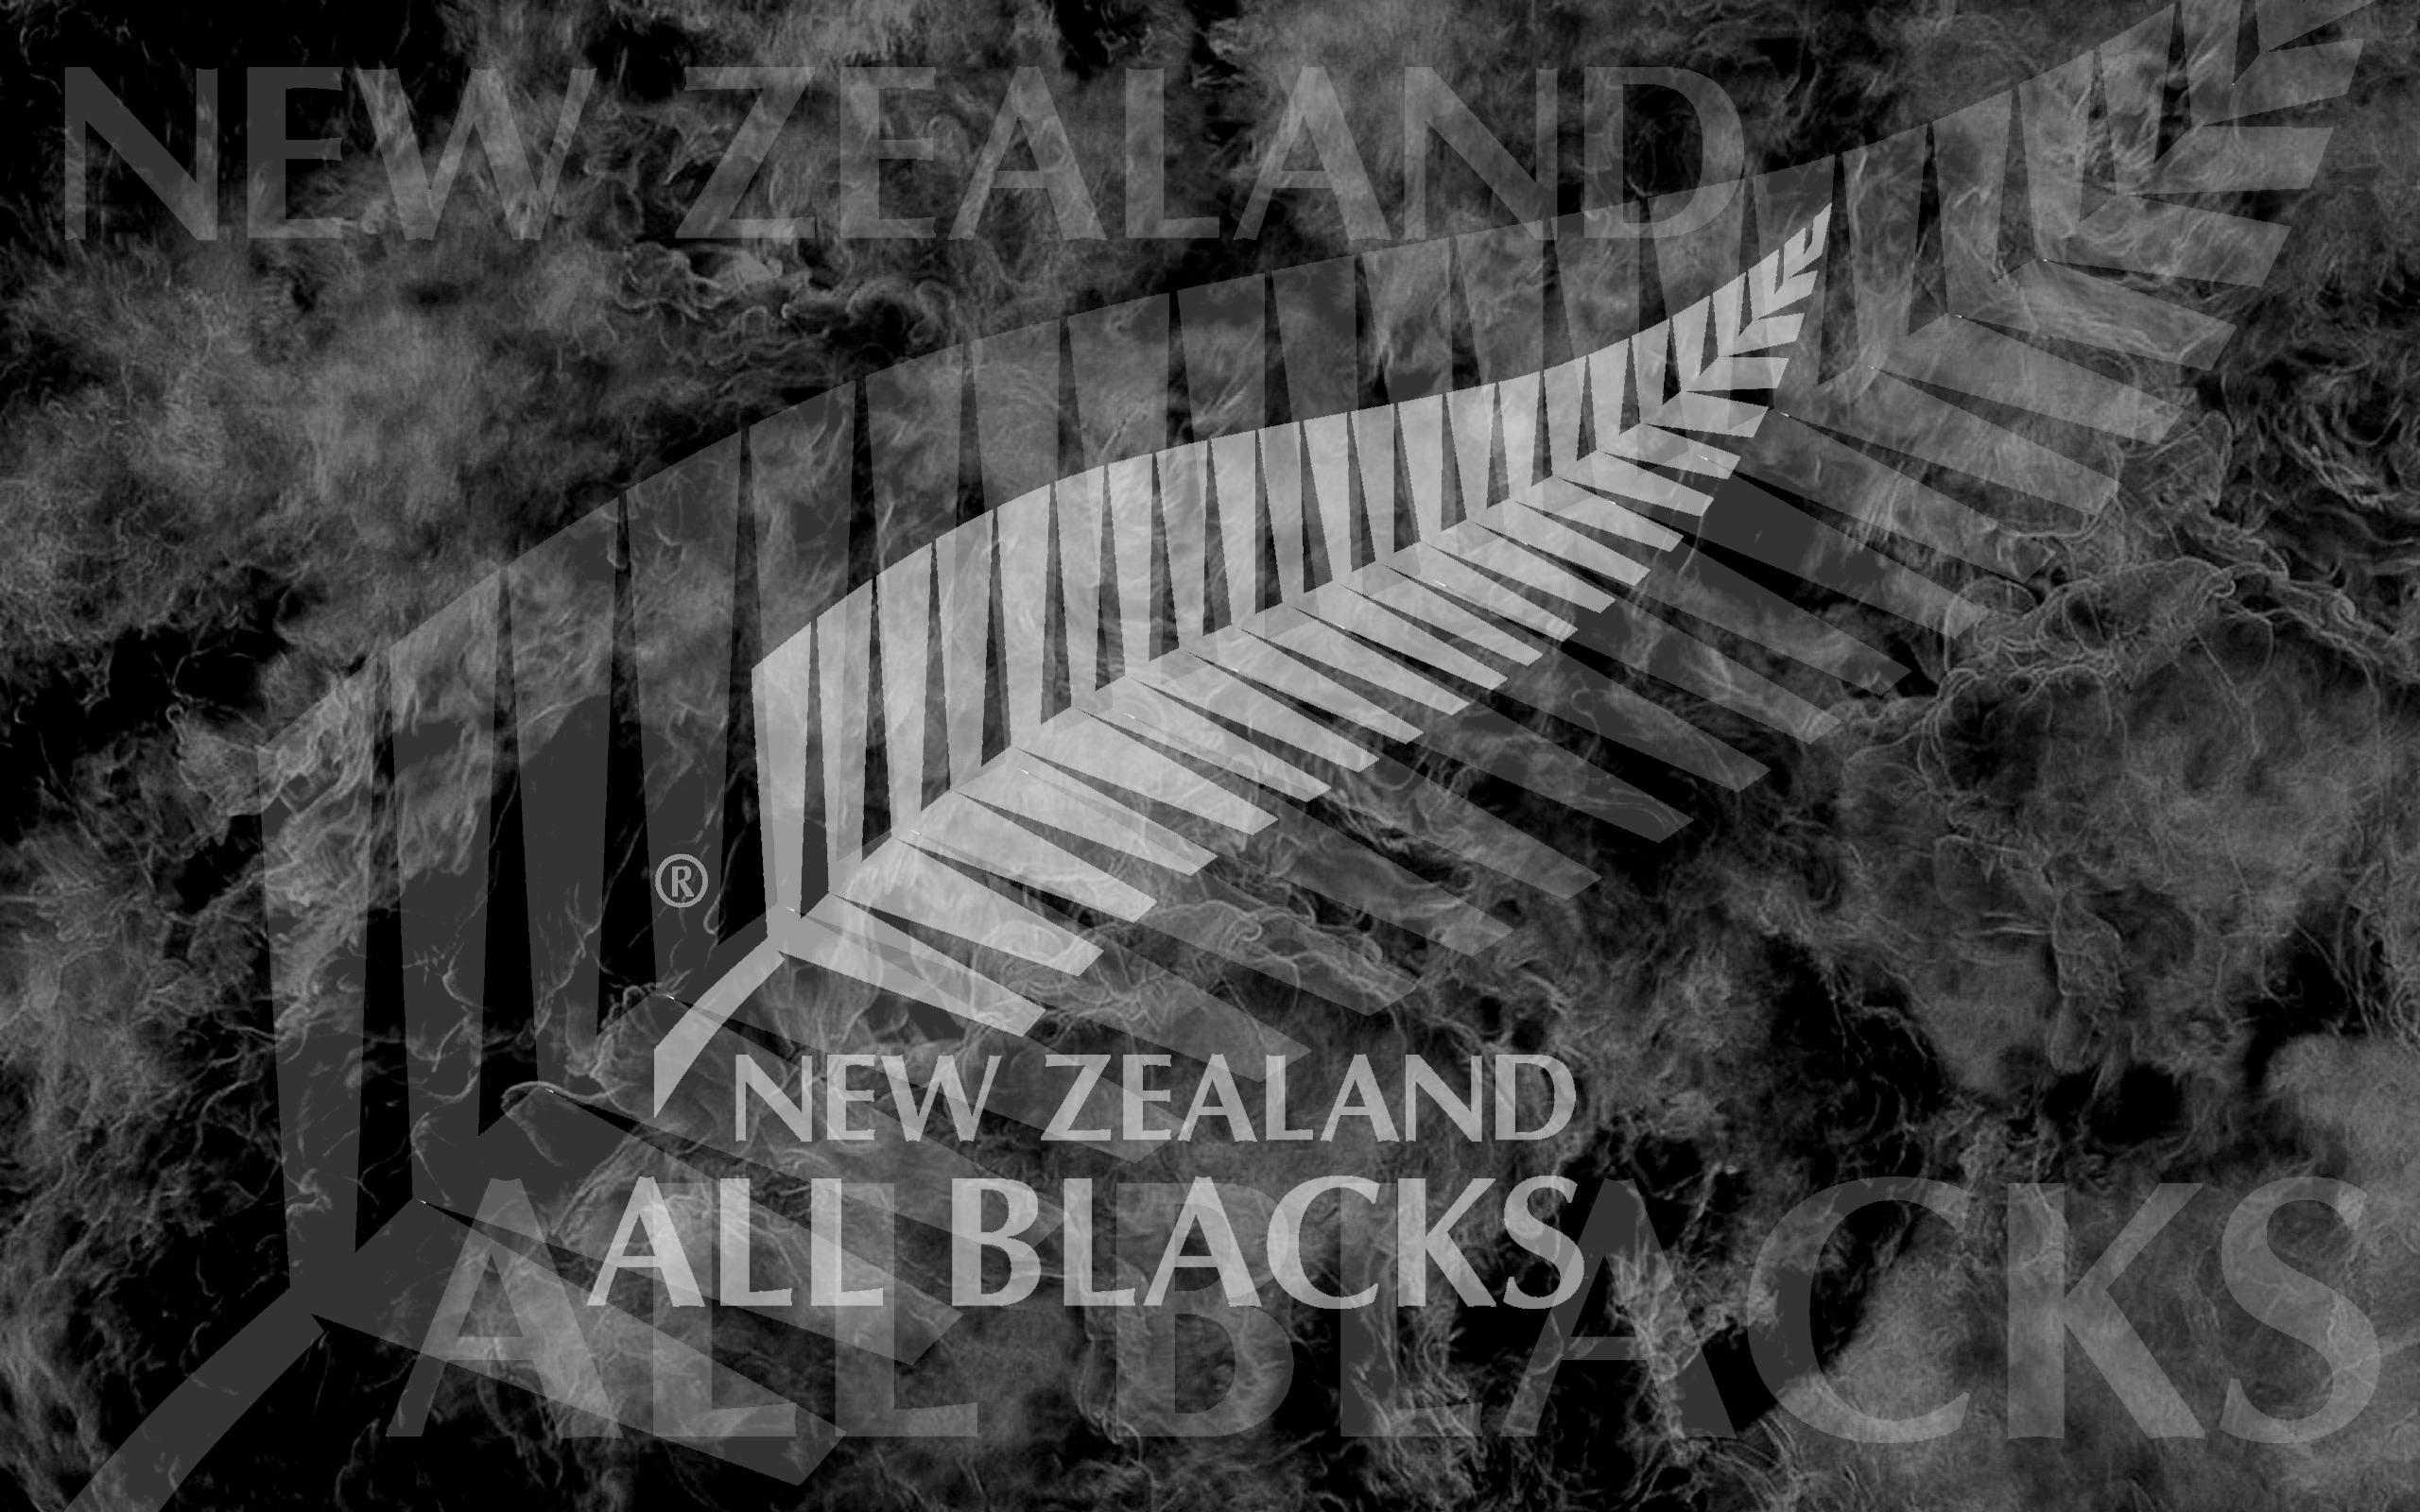 All Black Rugby Wallpaper, Picture